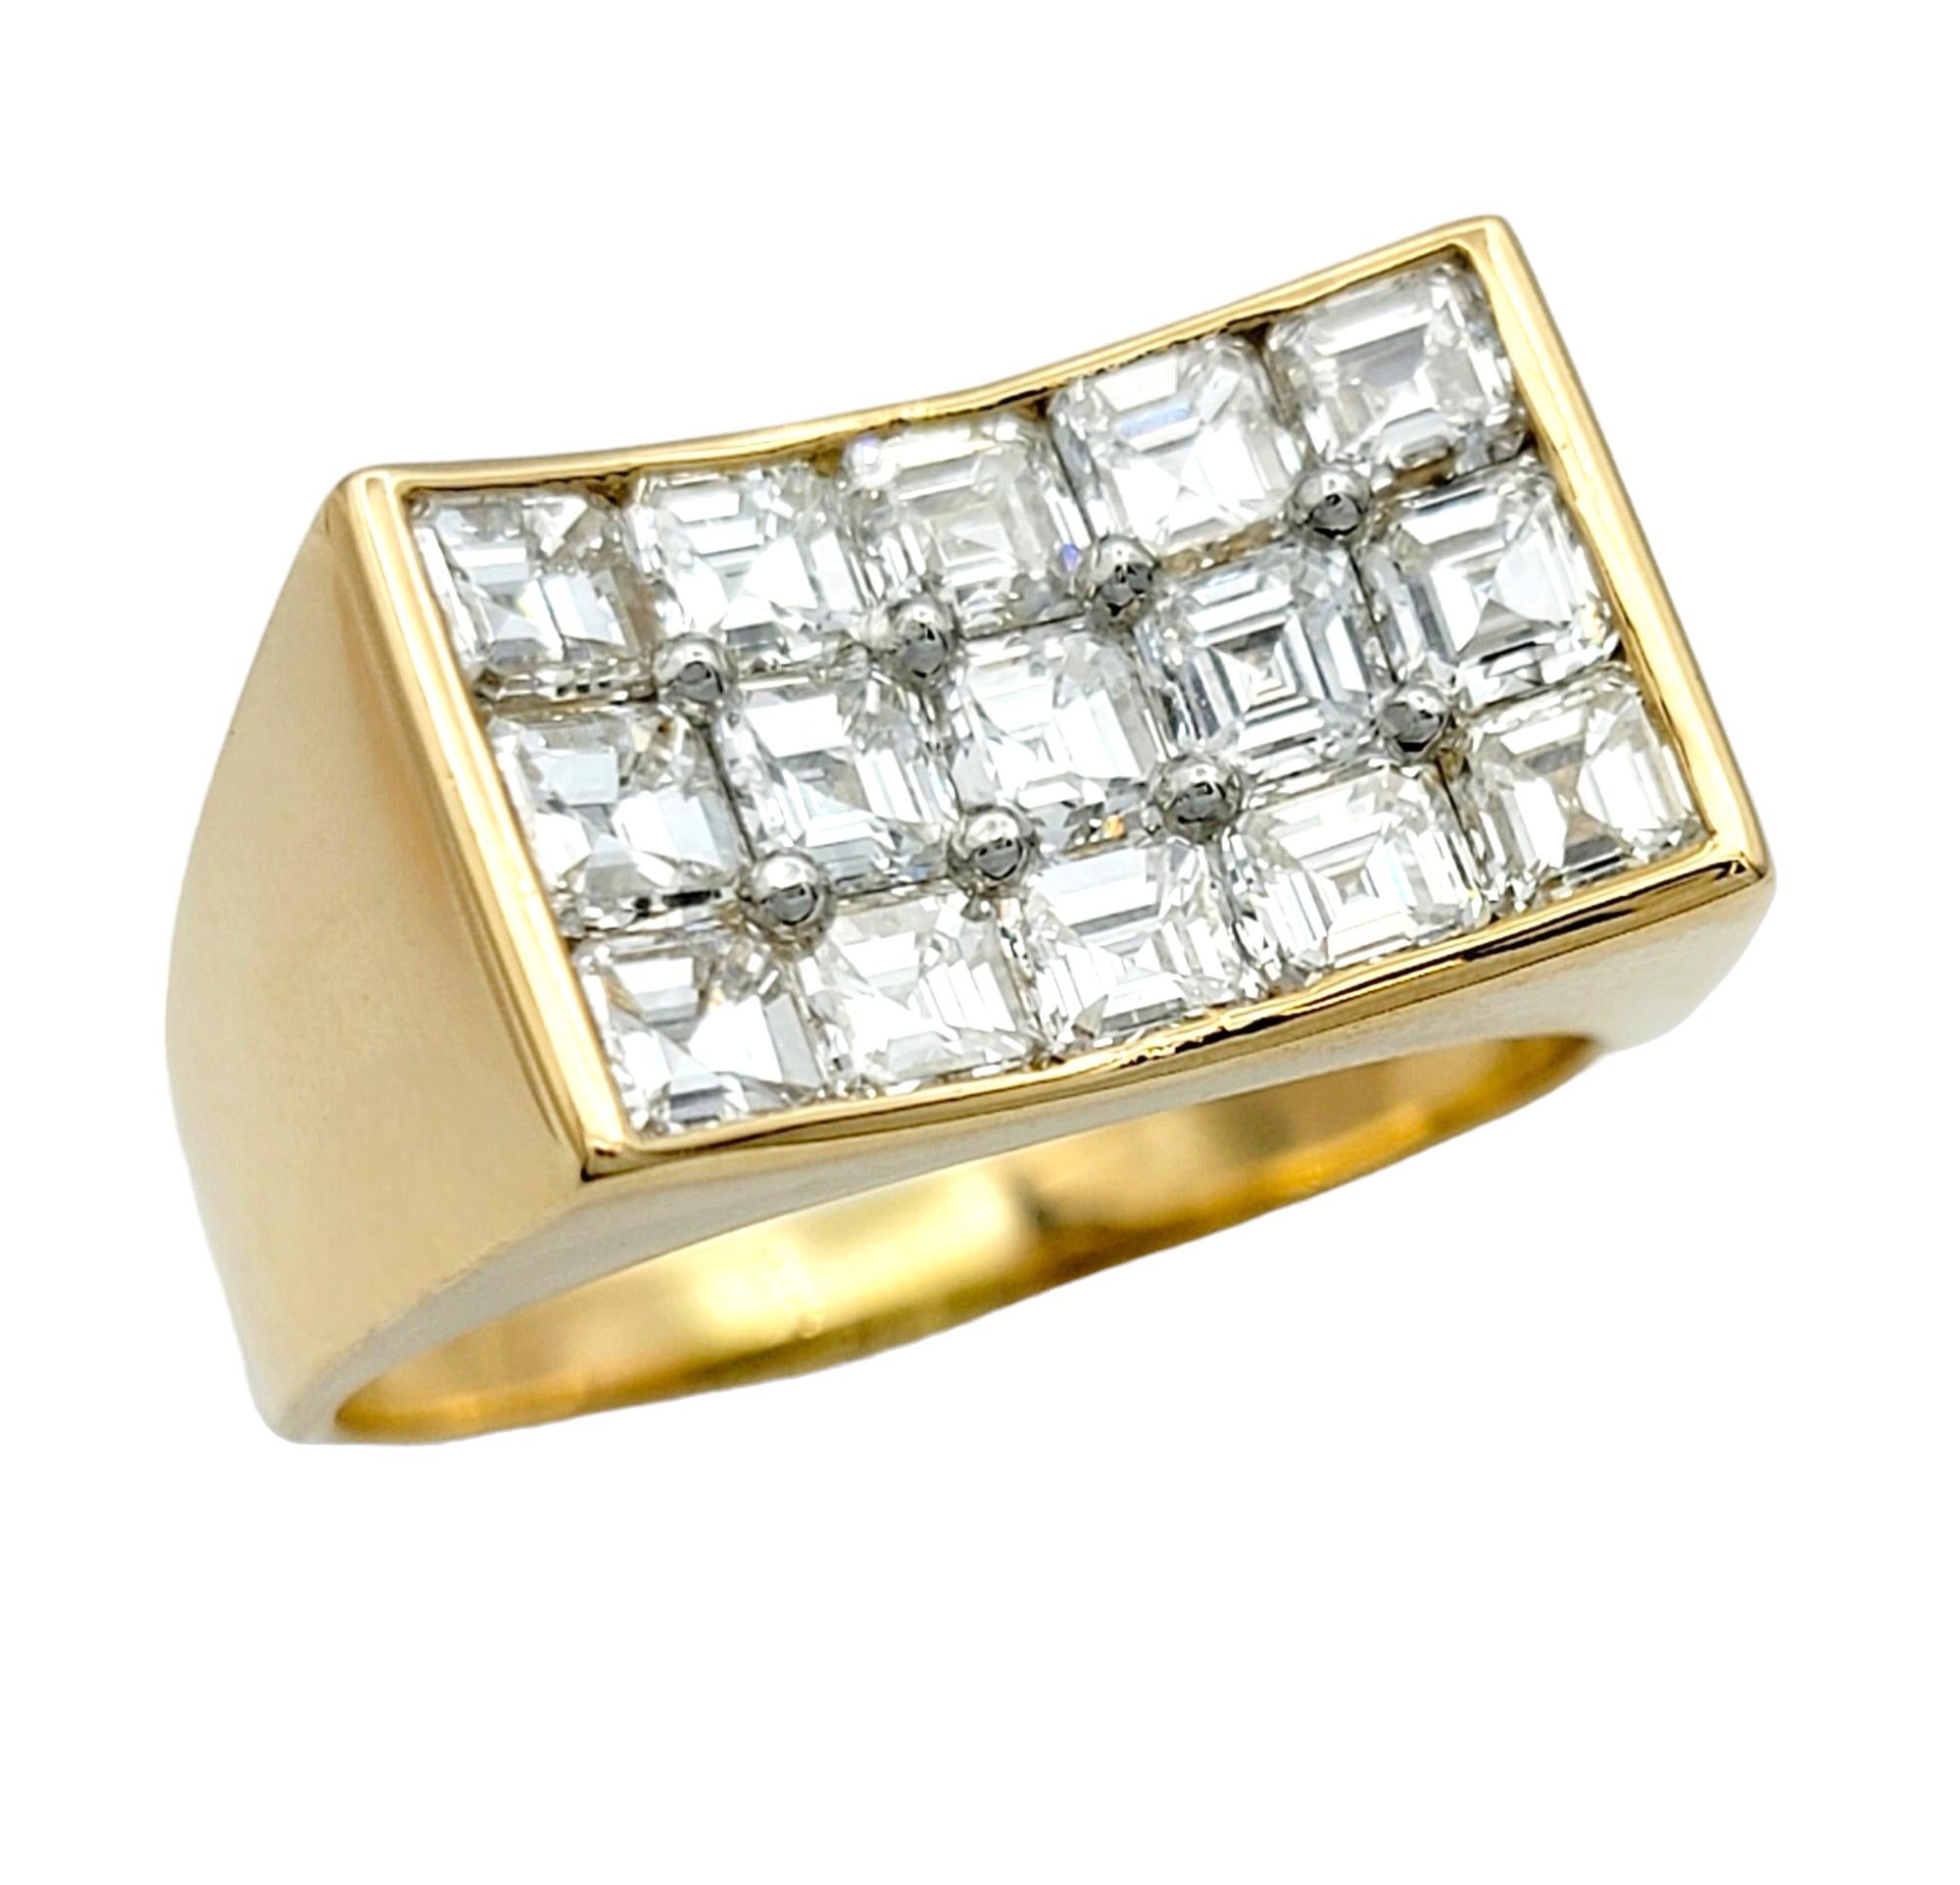 Ring Size: 8.75

This captivating ring, set in radiant 18 karat yellow gold, boasts a modern and distinctive design. At its heart, square diamonds are artfully clustered together, forming a mesmerizing concave shape that sets this piece apart. The